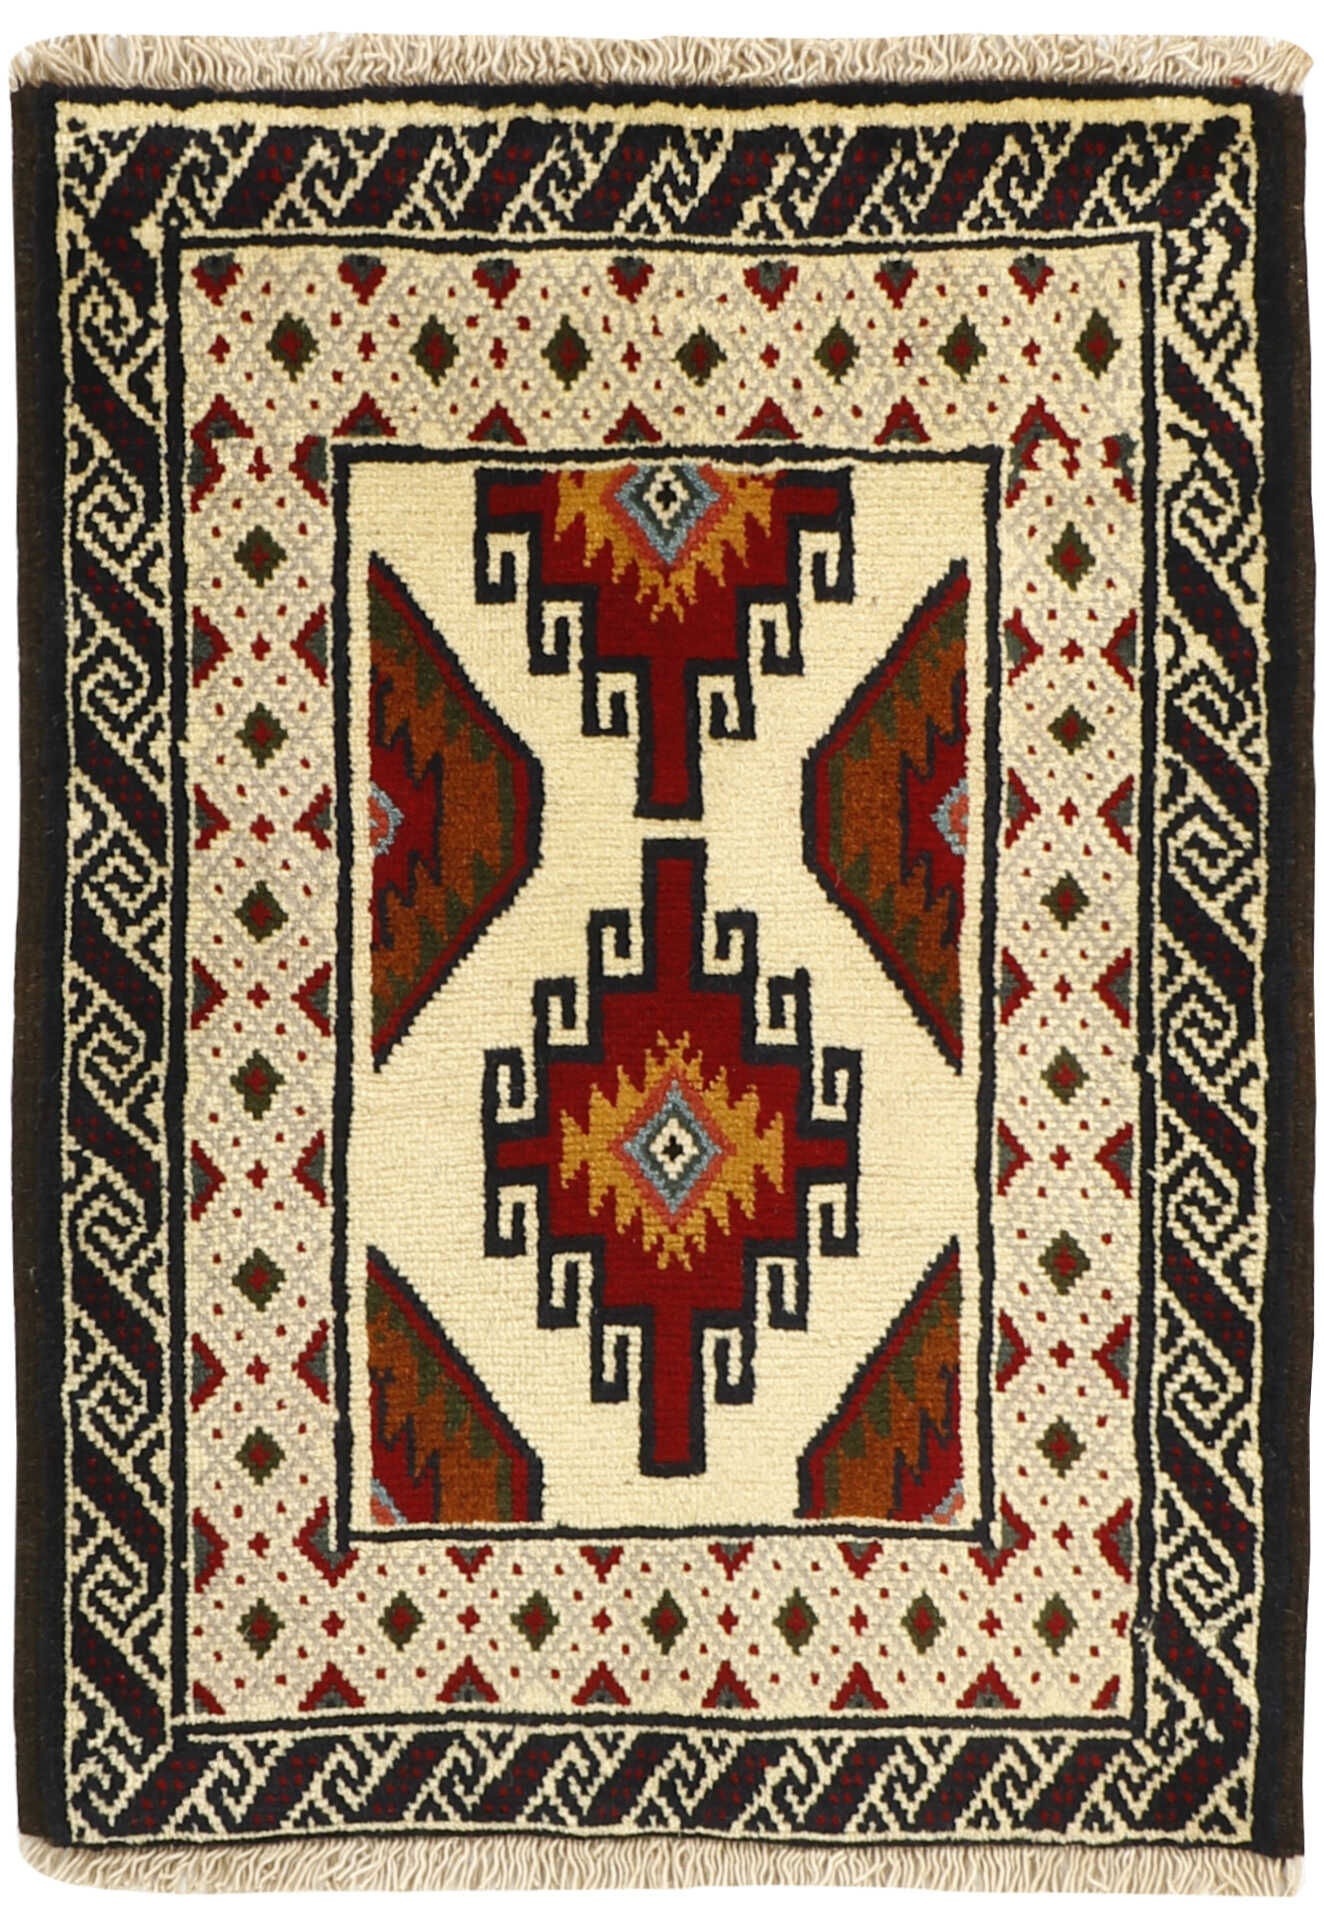 Cream Persian wool rug with traditional design